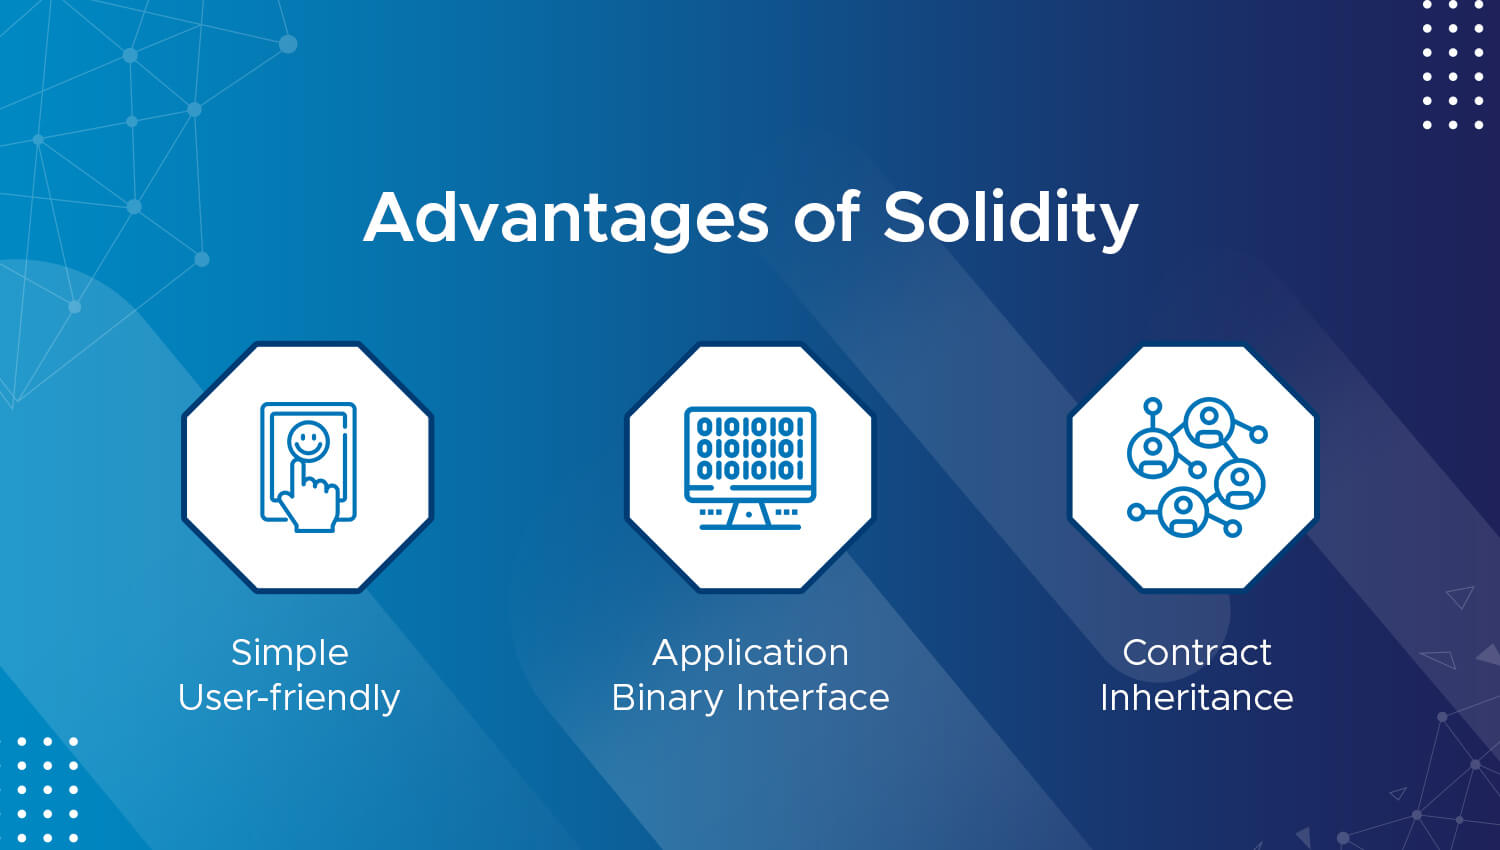 Advantages of Solidity